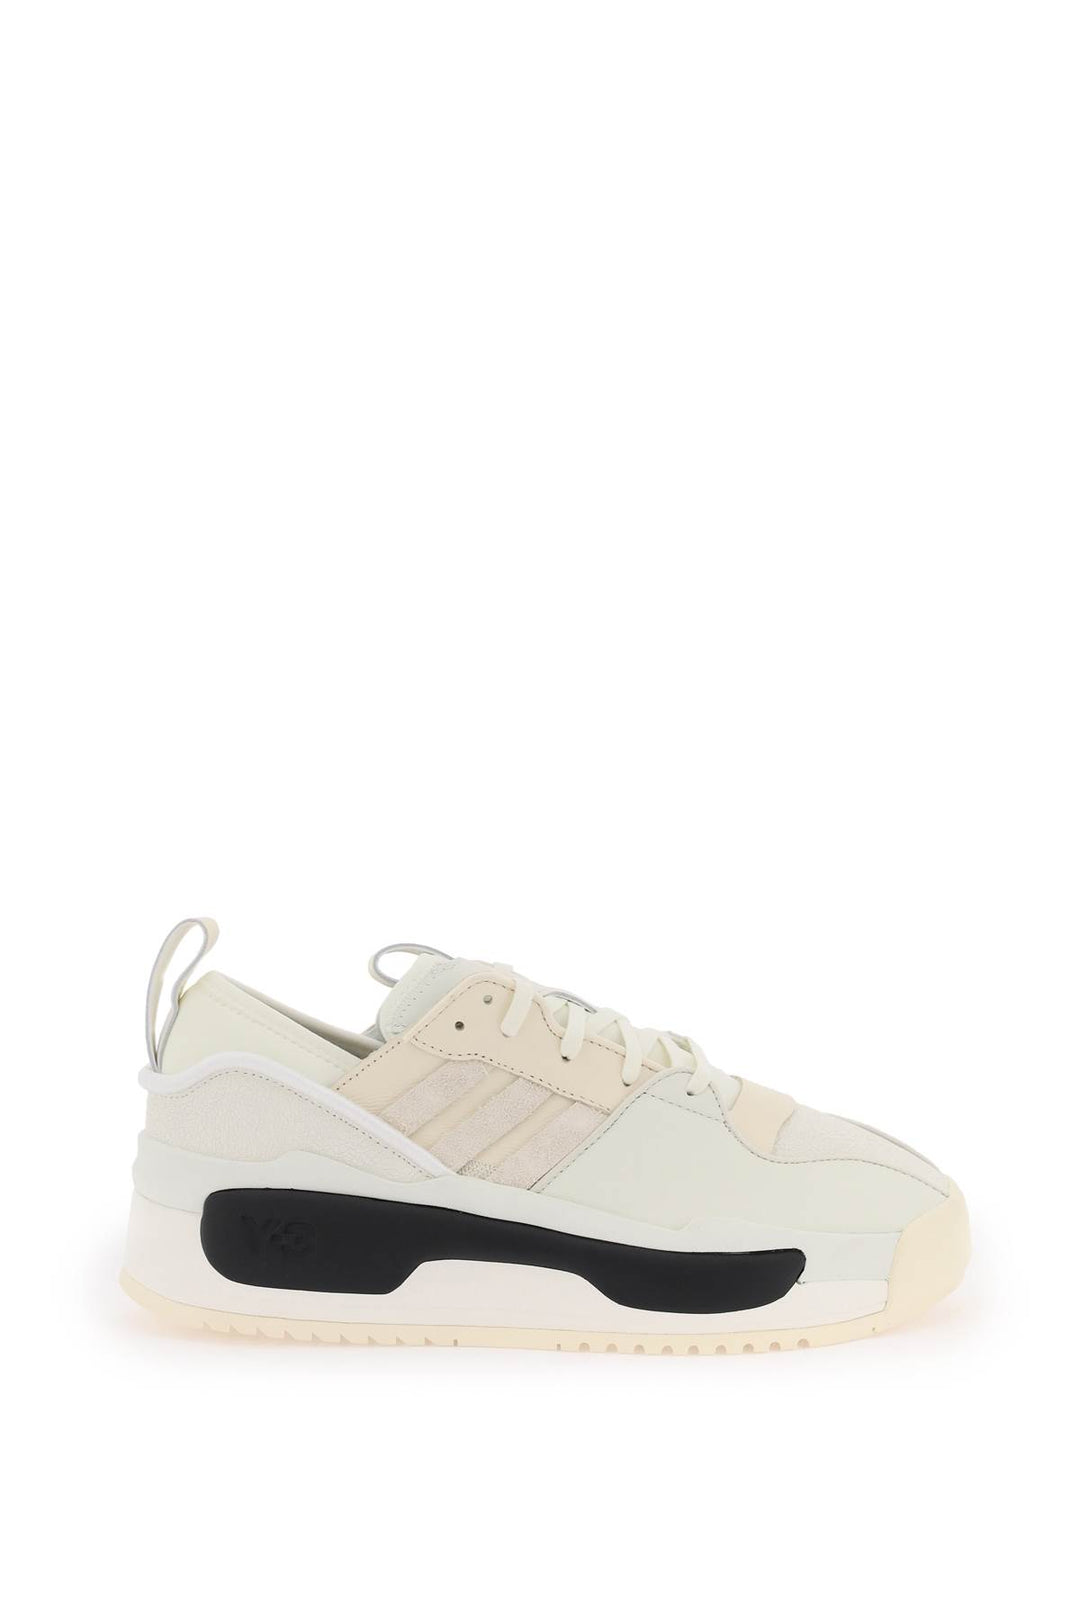 Y 3 Rivalry Sneakers   Bianco